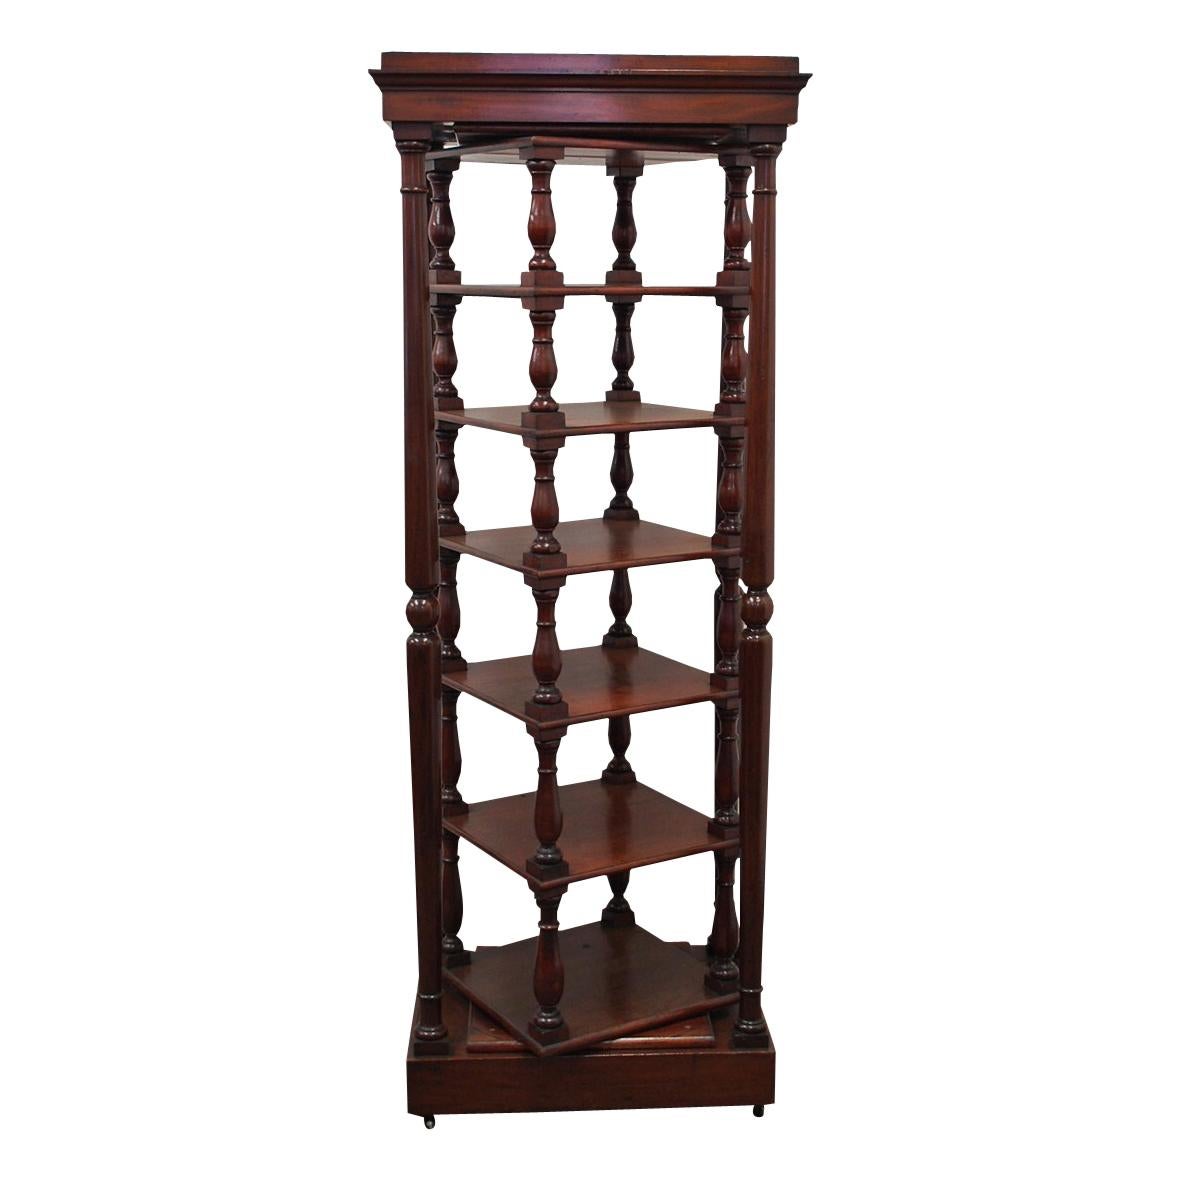 Rare full-size early Victorian revolving whatnot. The outer frame in figured mahogany has a rectangular top with moulded edge, supported on tall turned columns. This is over a deep plinth base which is finished on castors. Internally the six-tier